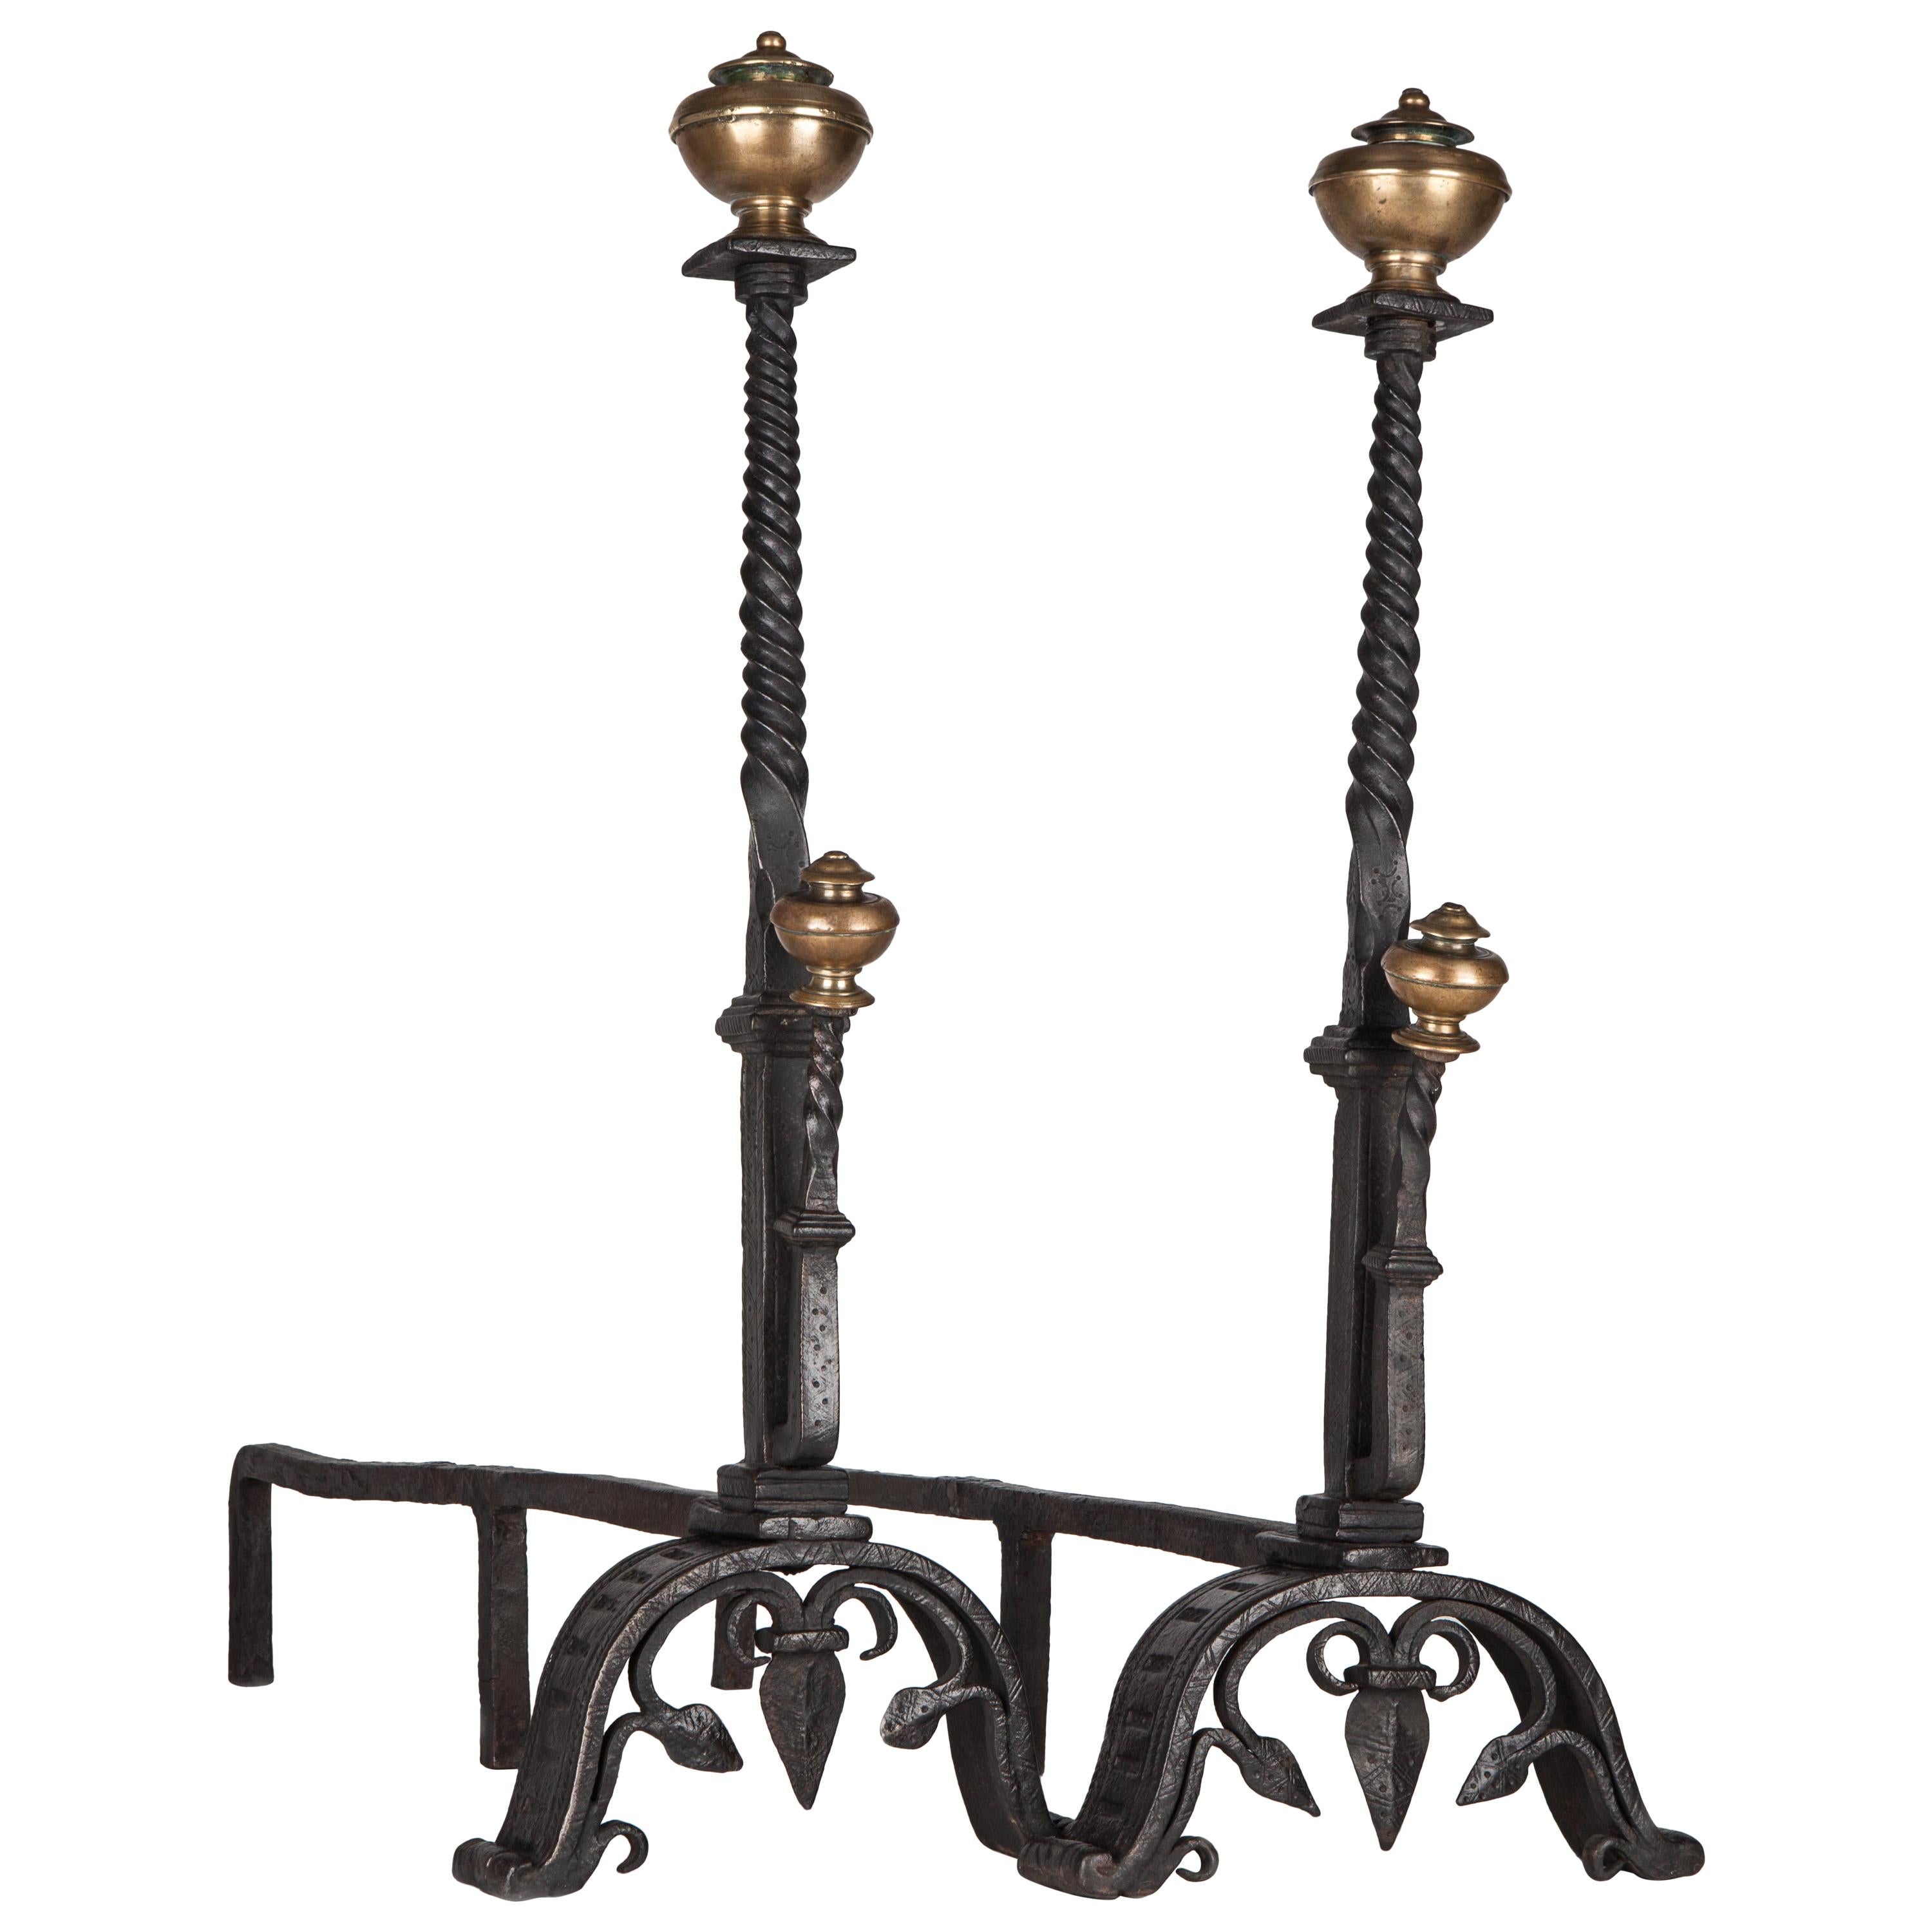 Gothic Wrought Iron Andirons with Forged Scrolled Feet and Brass Finials, 1920s For Sale